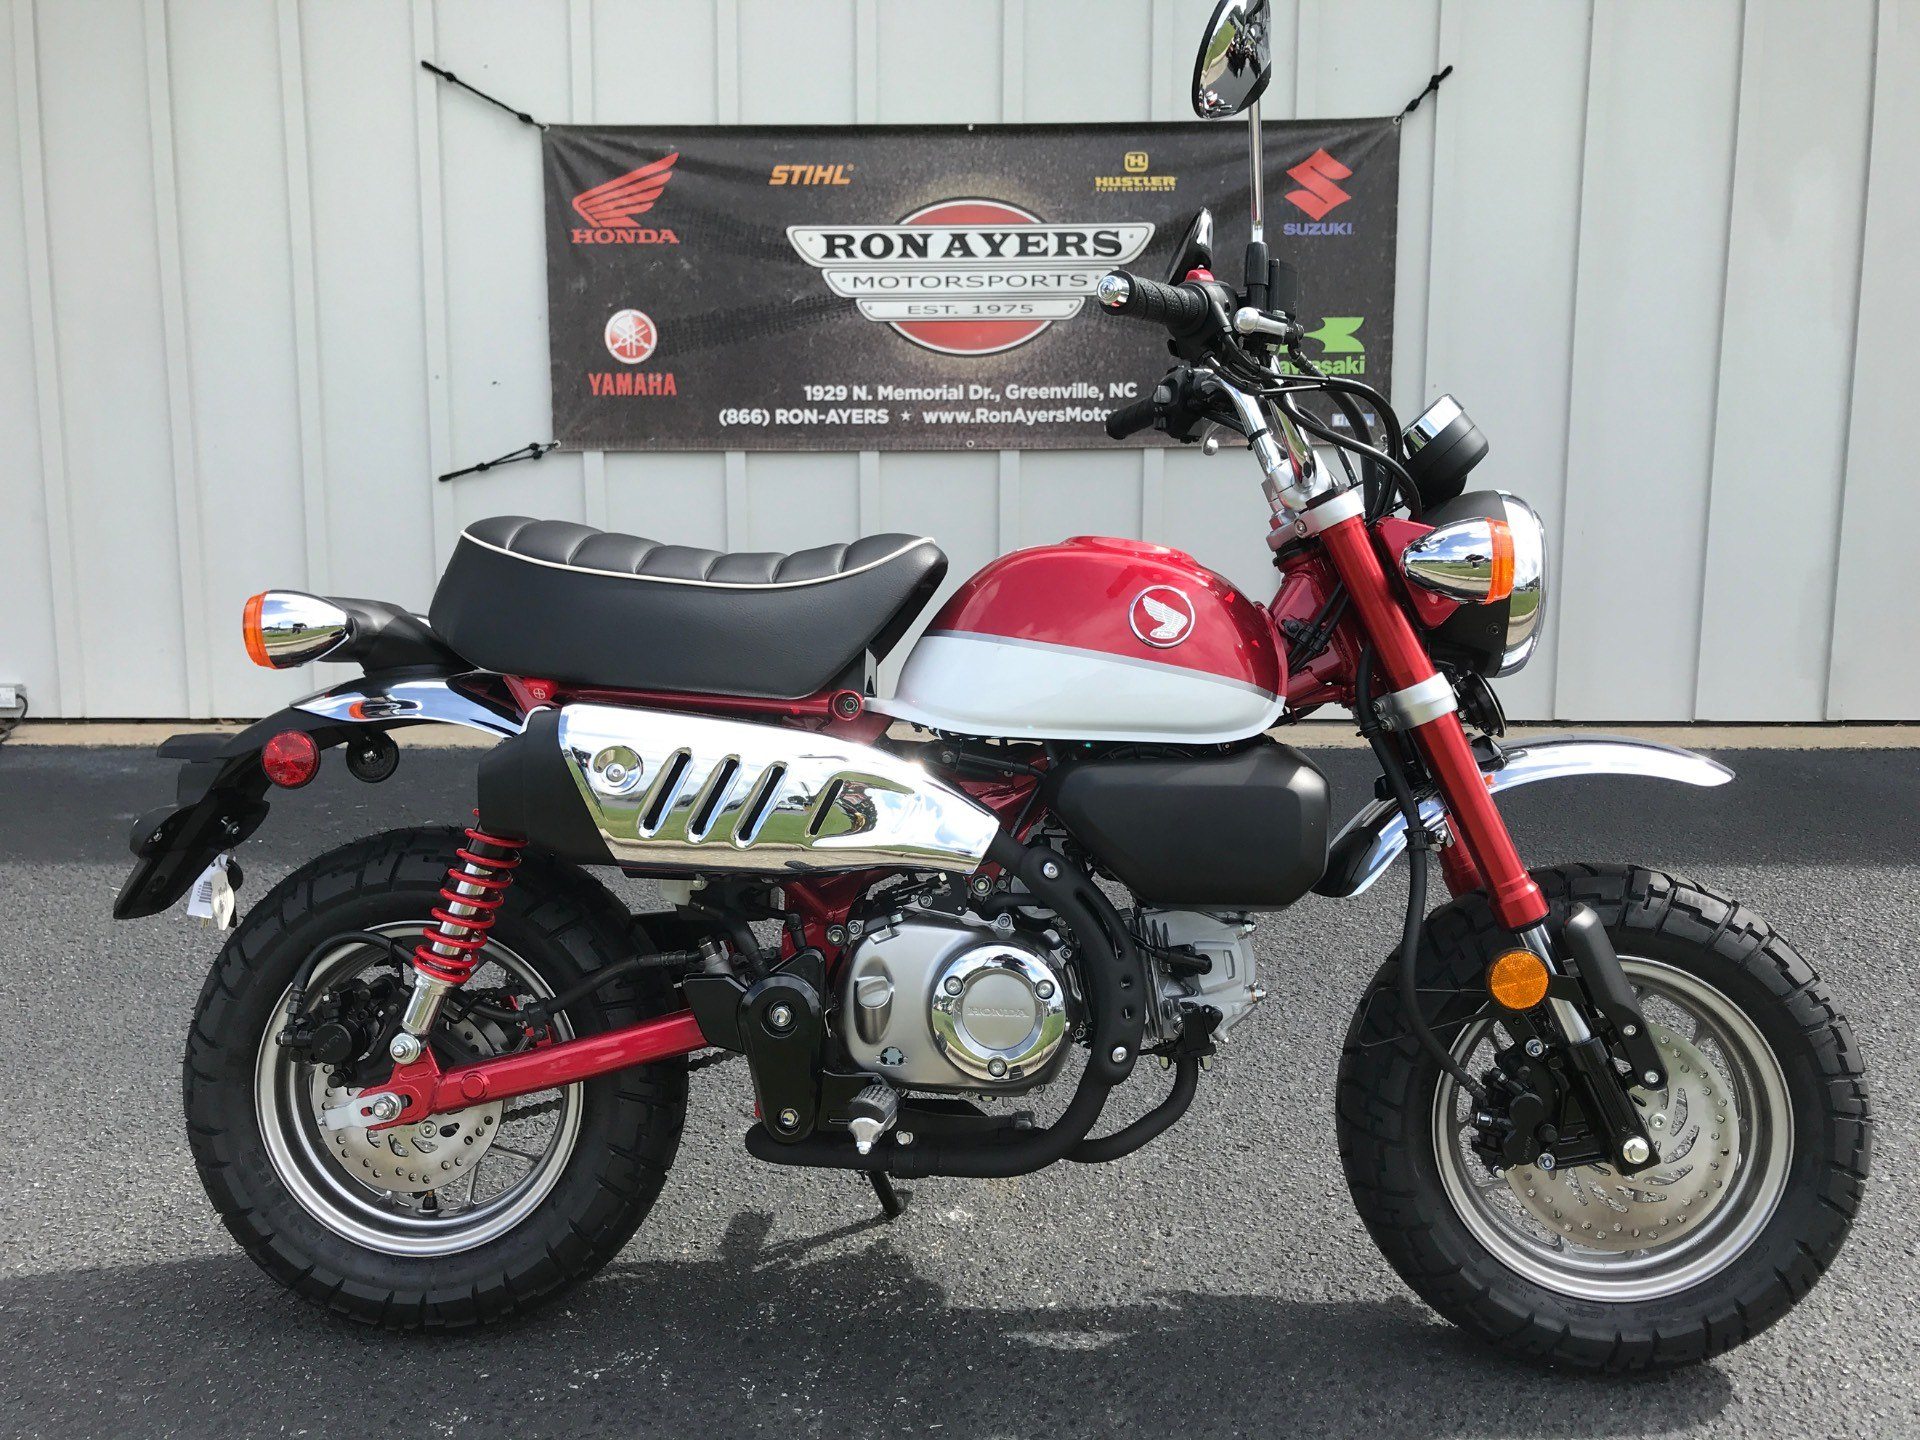 New 2020 Honda Monkey Motorcycles In Greenville Nc Stock Number N A